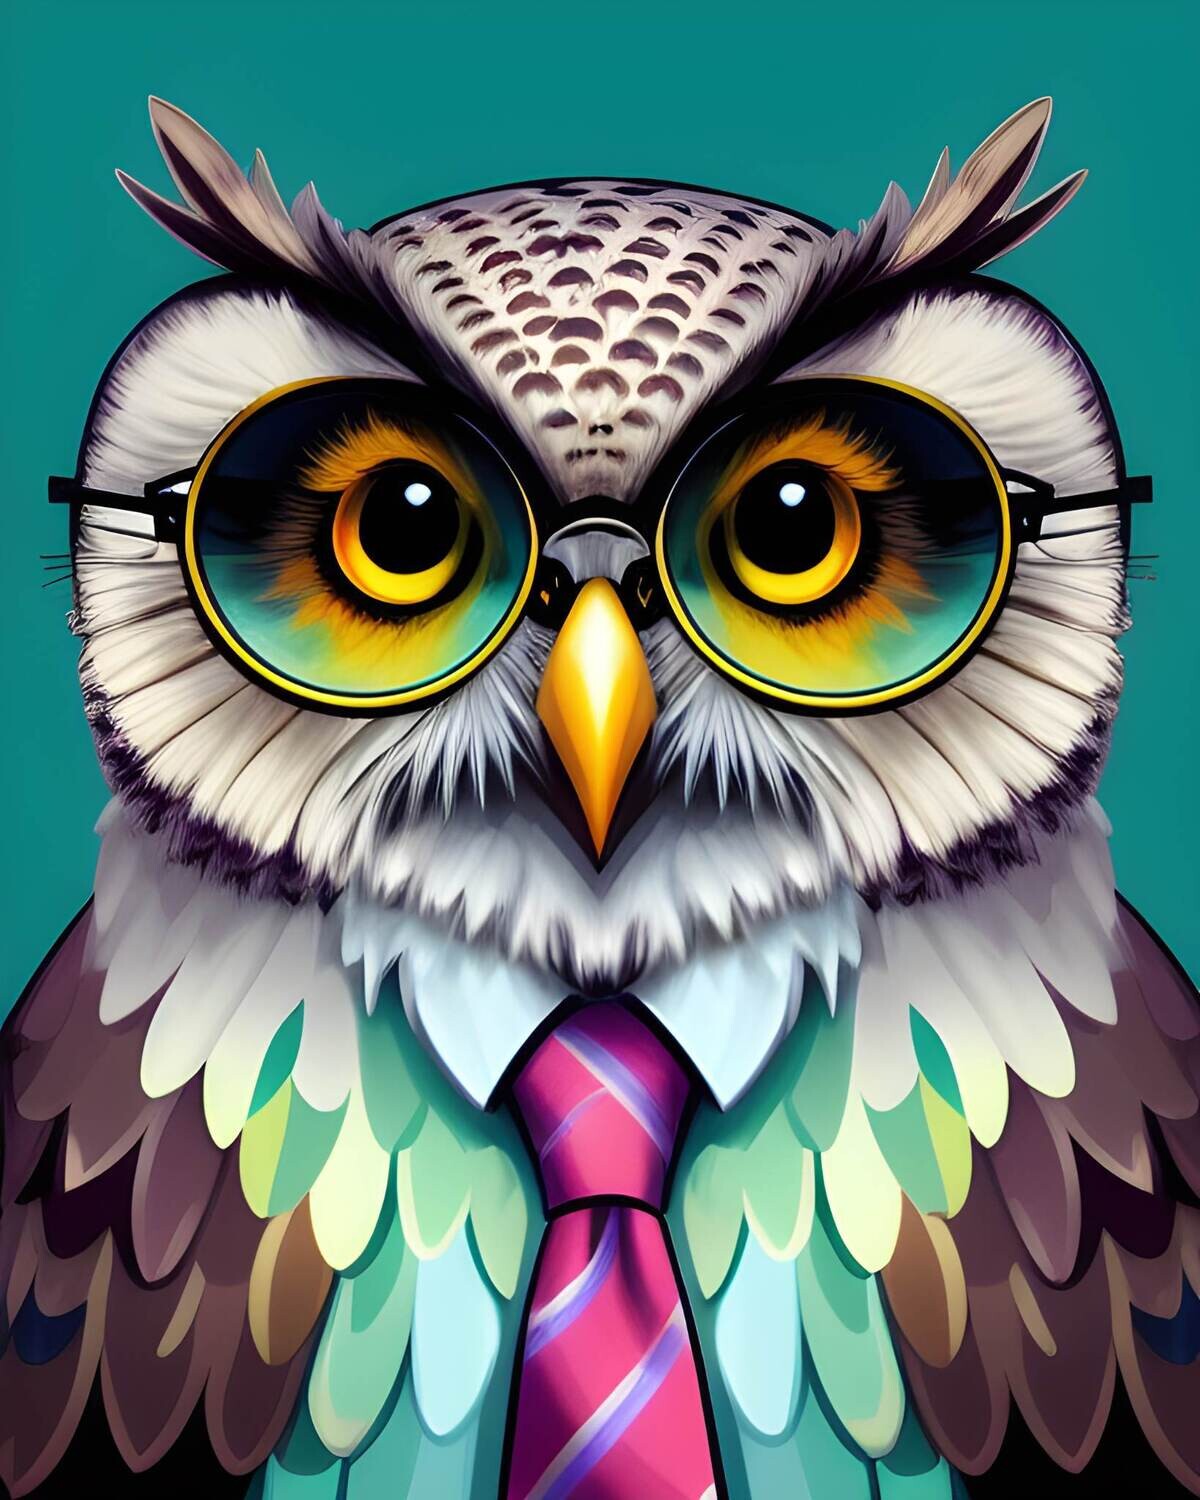 Smart Owl 552 - 30 x 40cm Full Drill (Round) with AB drills - POURED GLUE - Diamond Painting Kit